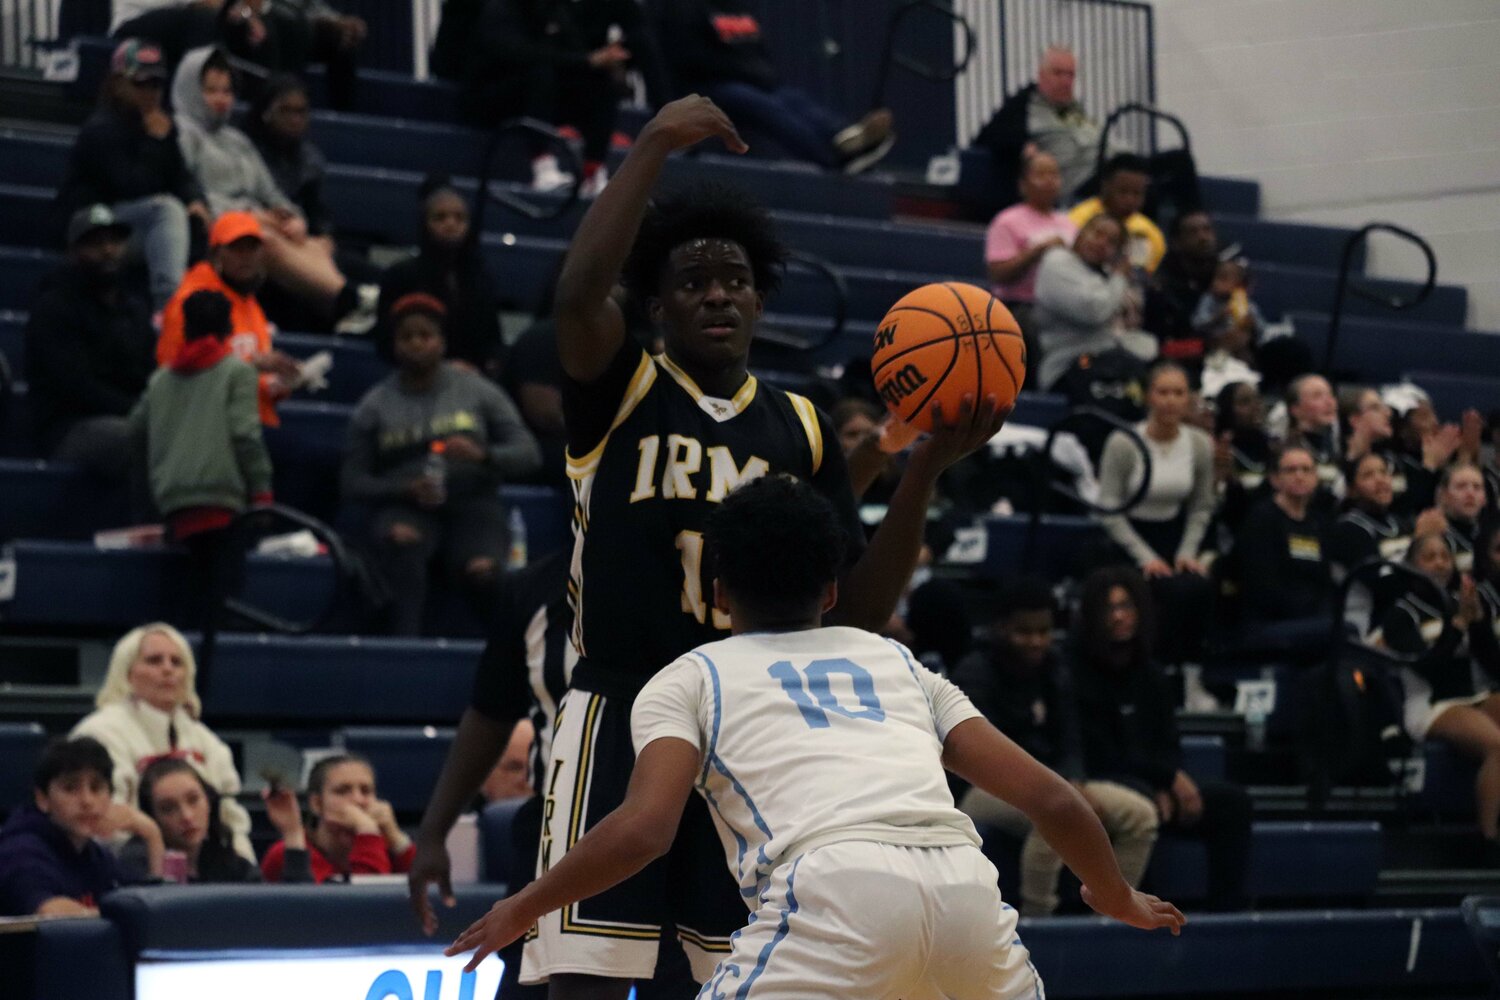 The Irmo basketball team outscored Chapin 41-18 in the second and third quarters to secure the Yellow Jackets' second win of the season.